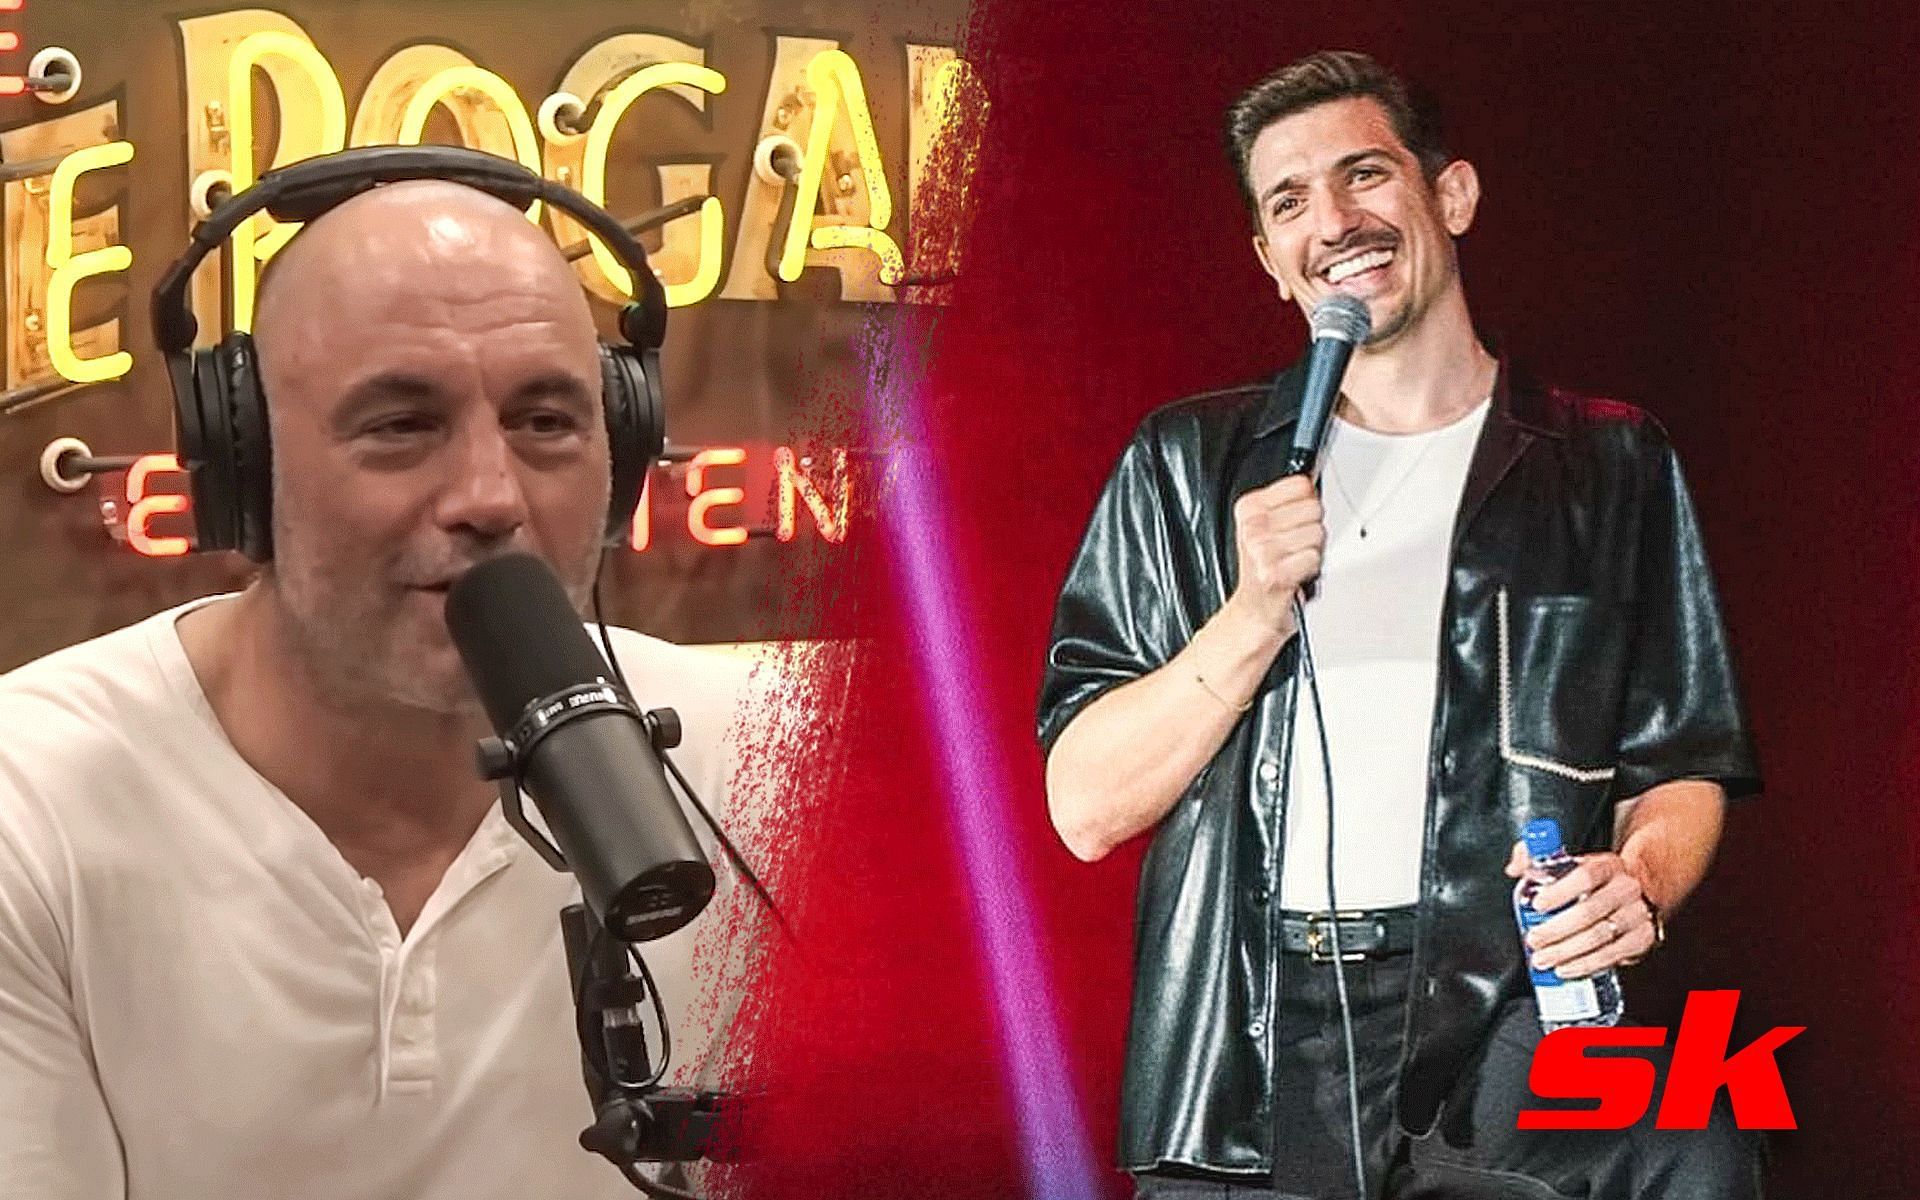 Joe Rogan (left), Andrew Schulz (right) [Images courtesy of Powerful JRE on YouTube &amp; @andrewschulz on Instagram]